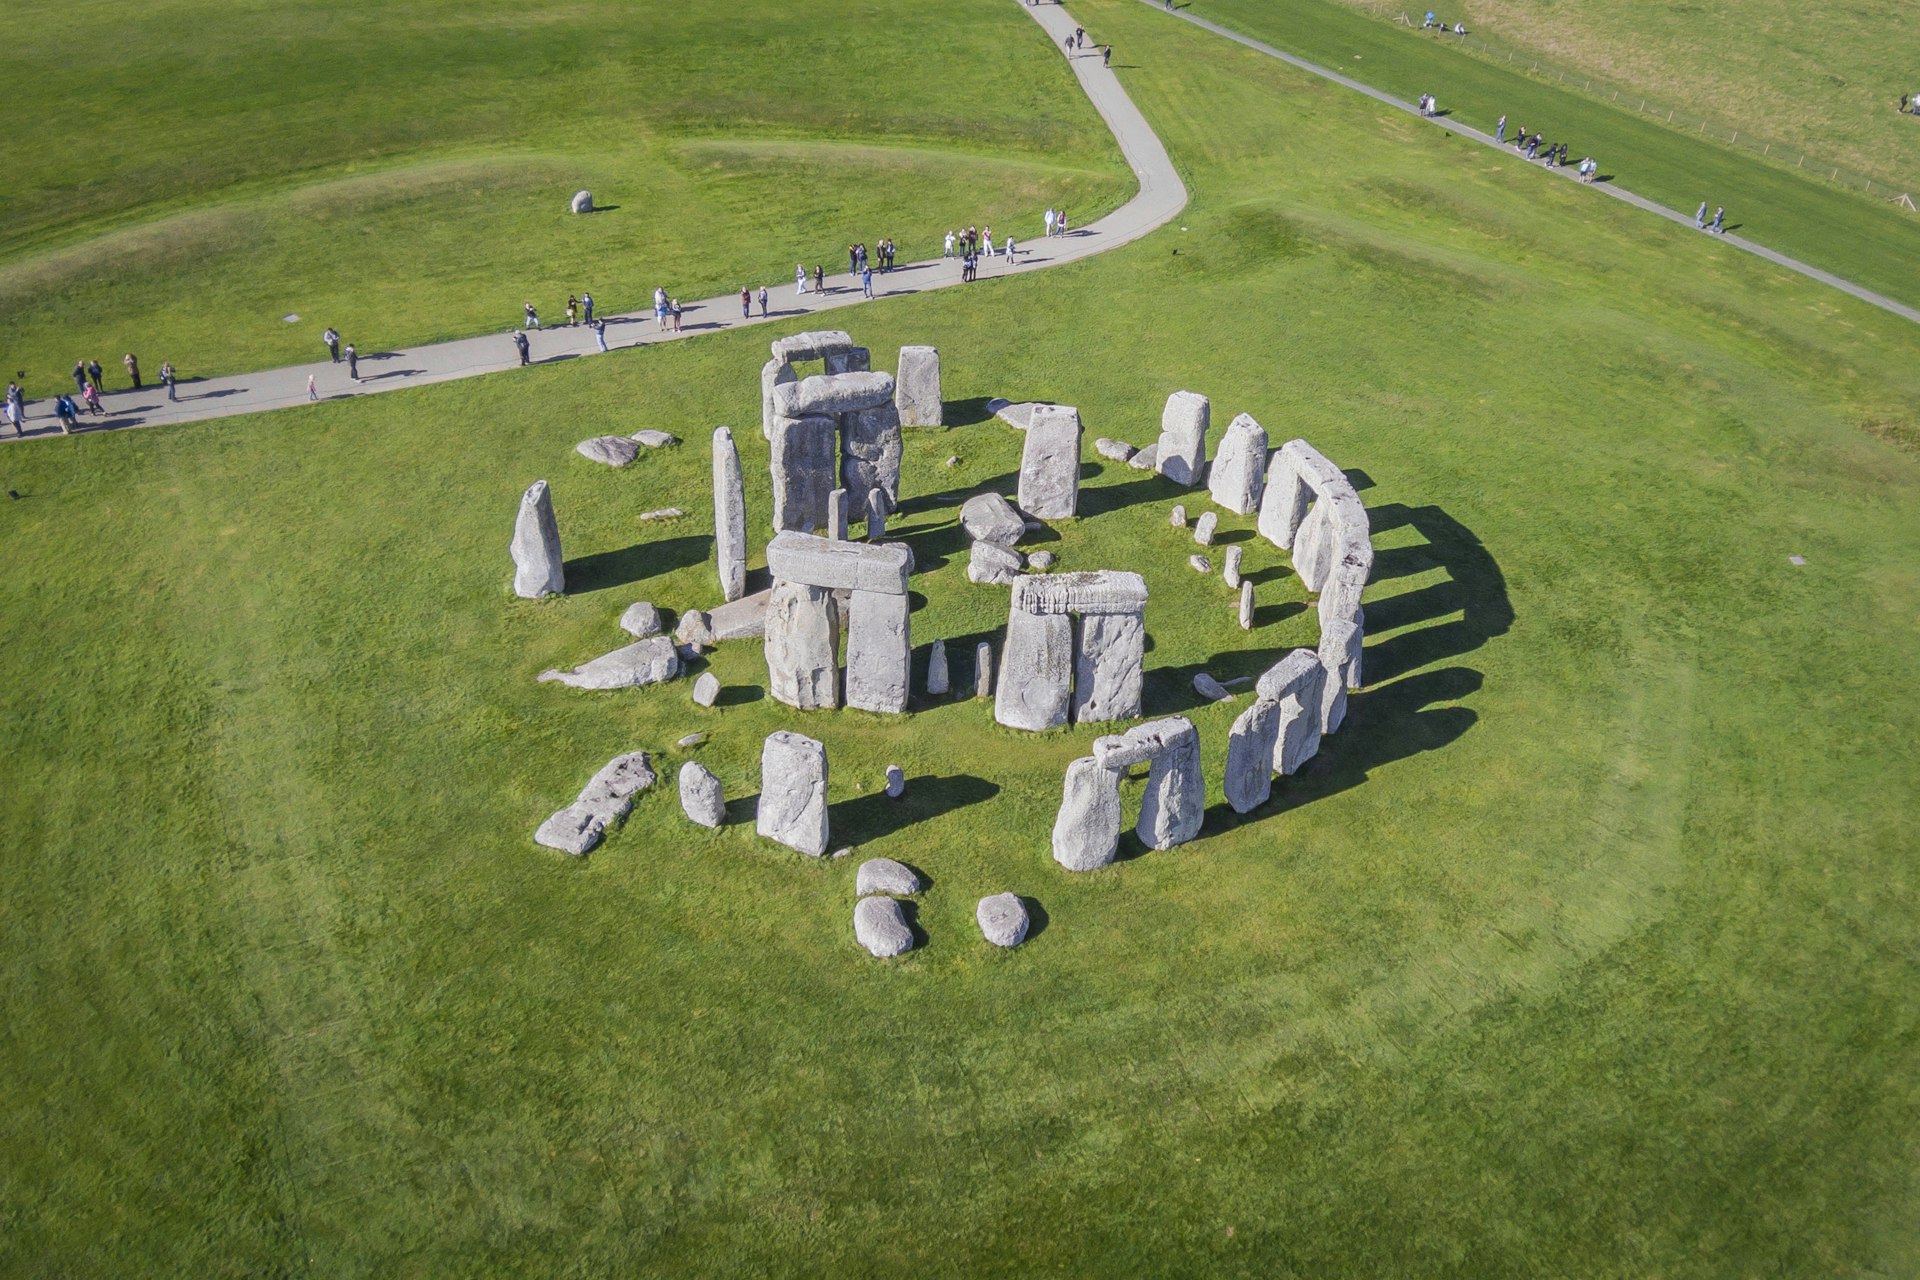 Aerial photograph showing people visiting Stonehenge which is a UNESCO World Heritage Site in England